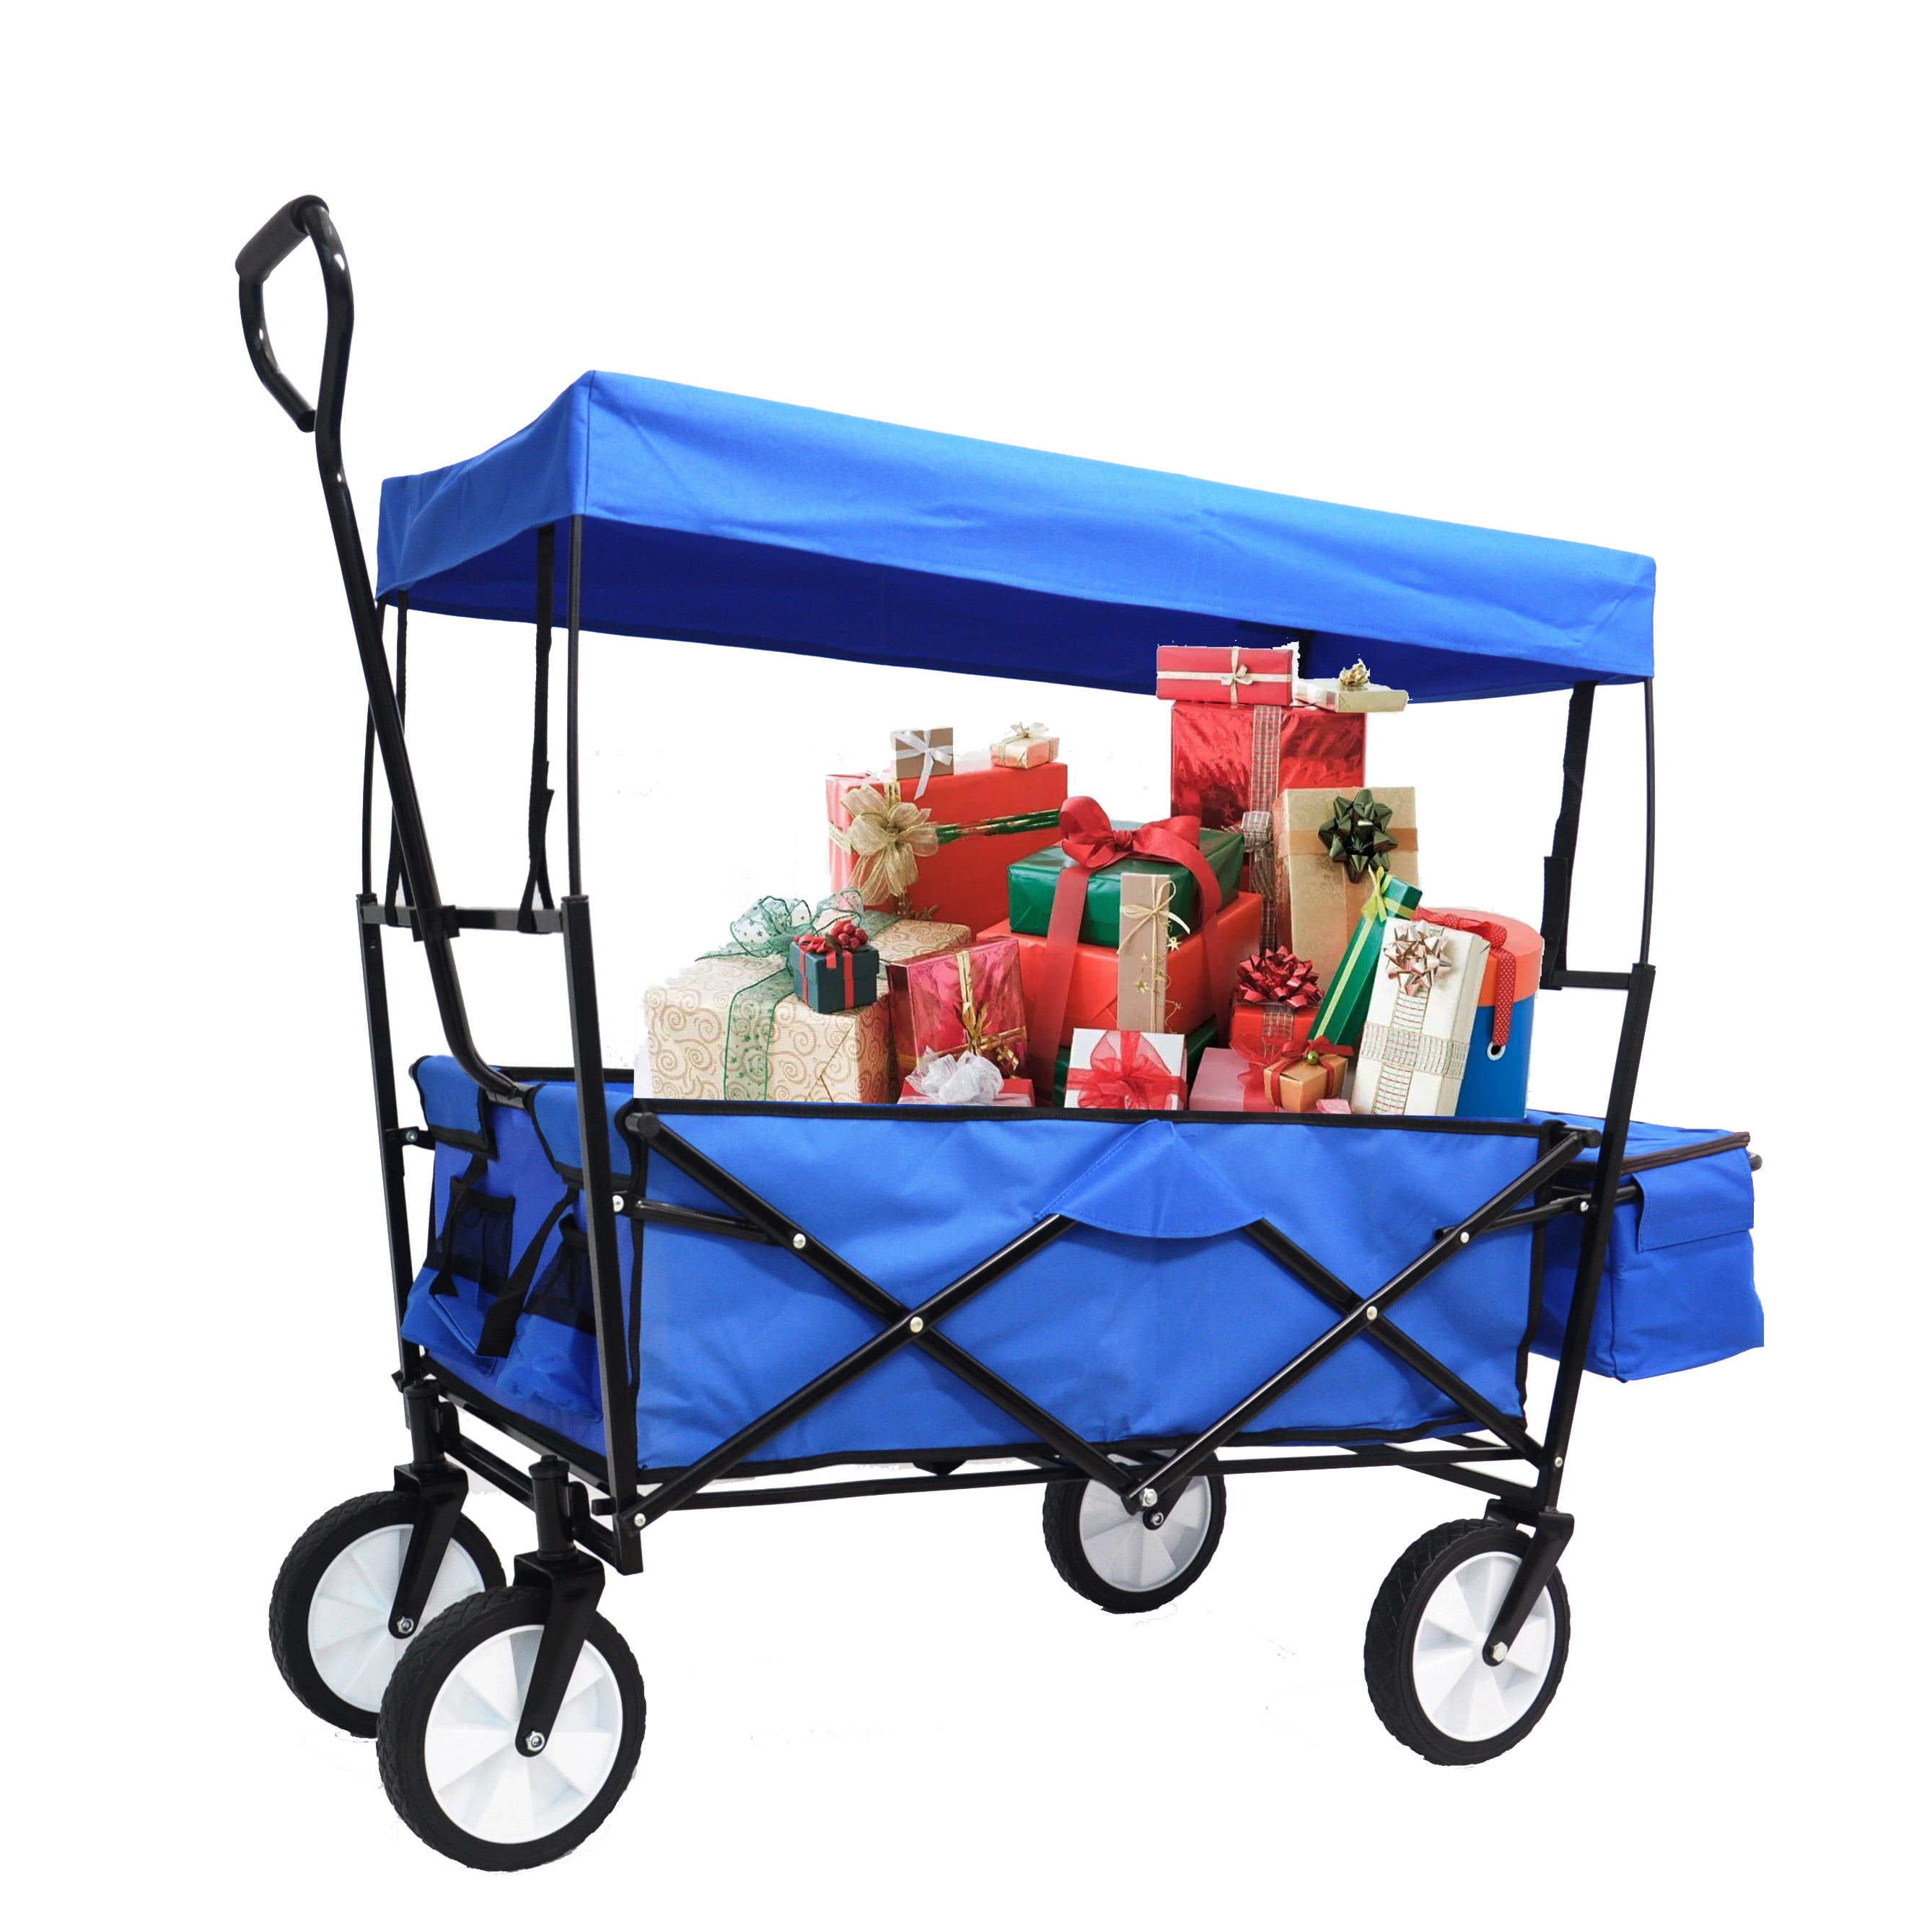 Best Choice Products Folding Utility Cargo Wagon Cart w/Removable Canopy Cup Holders Blue 